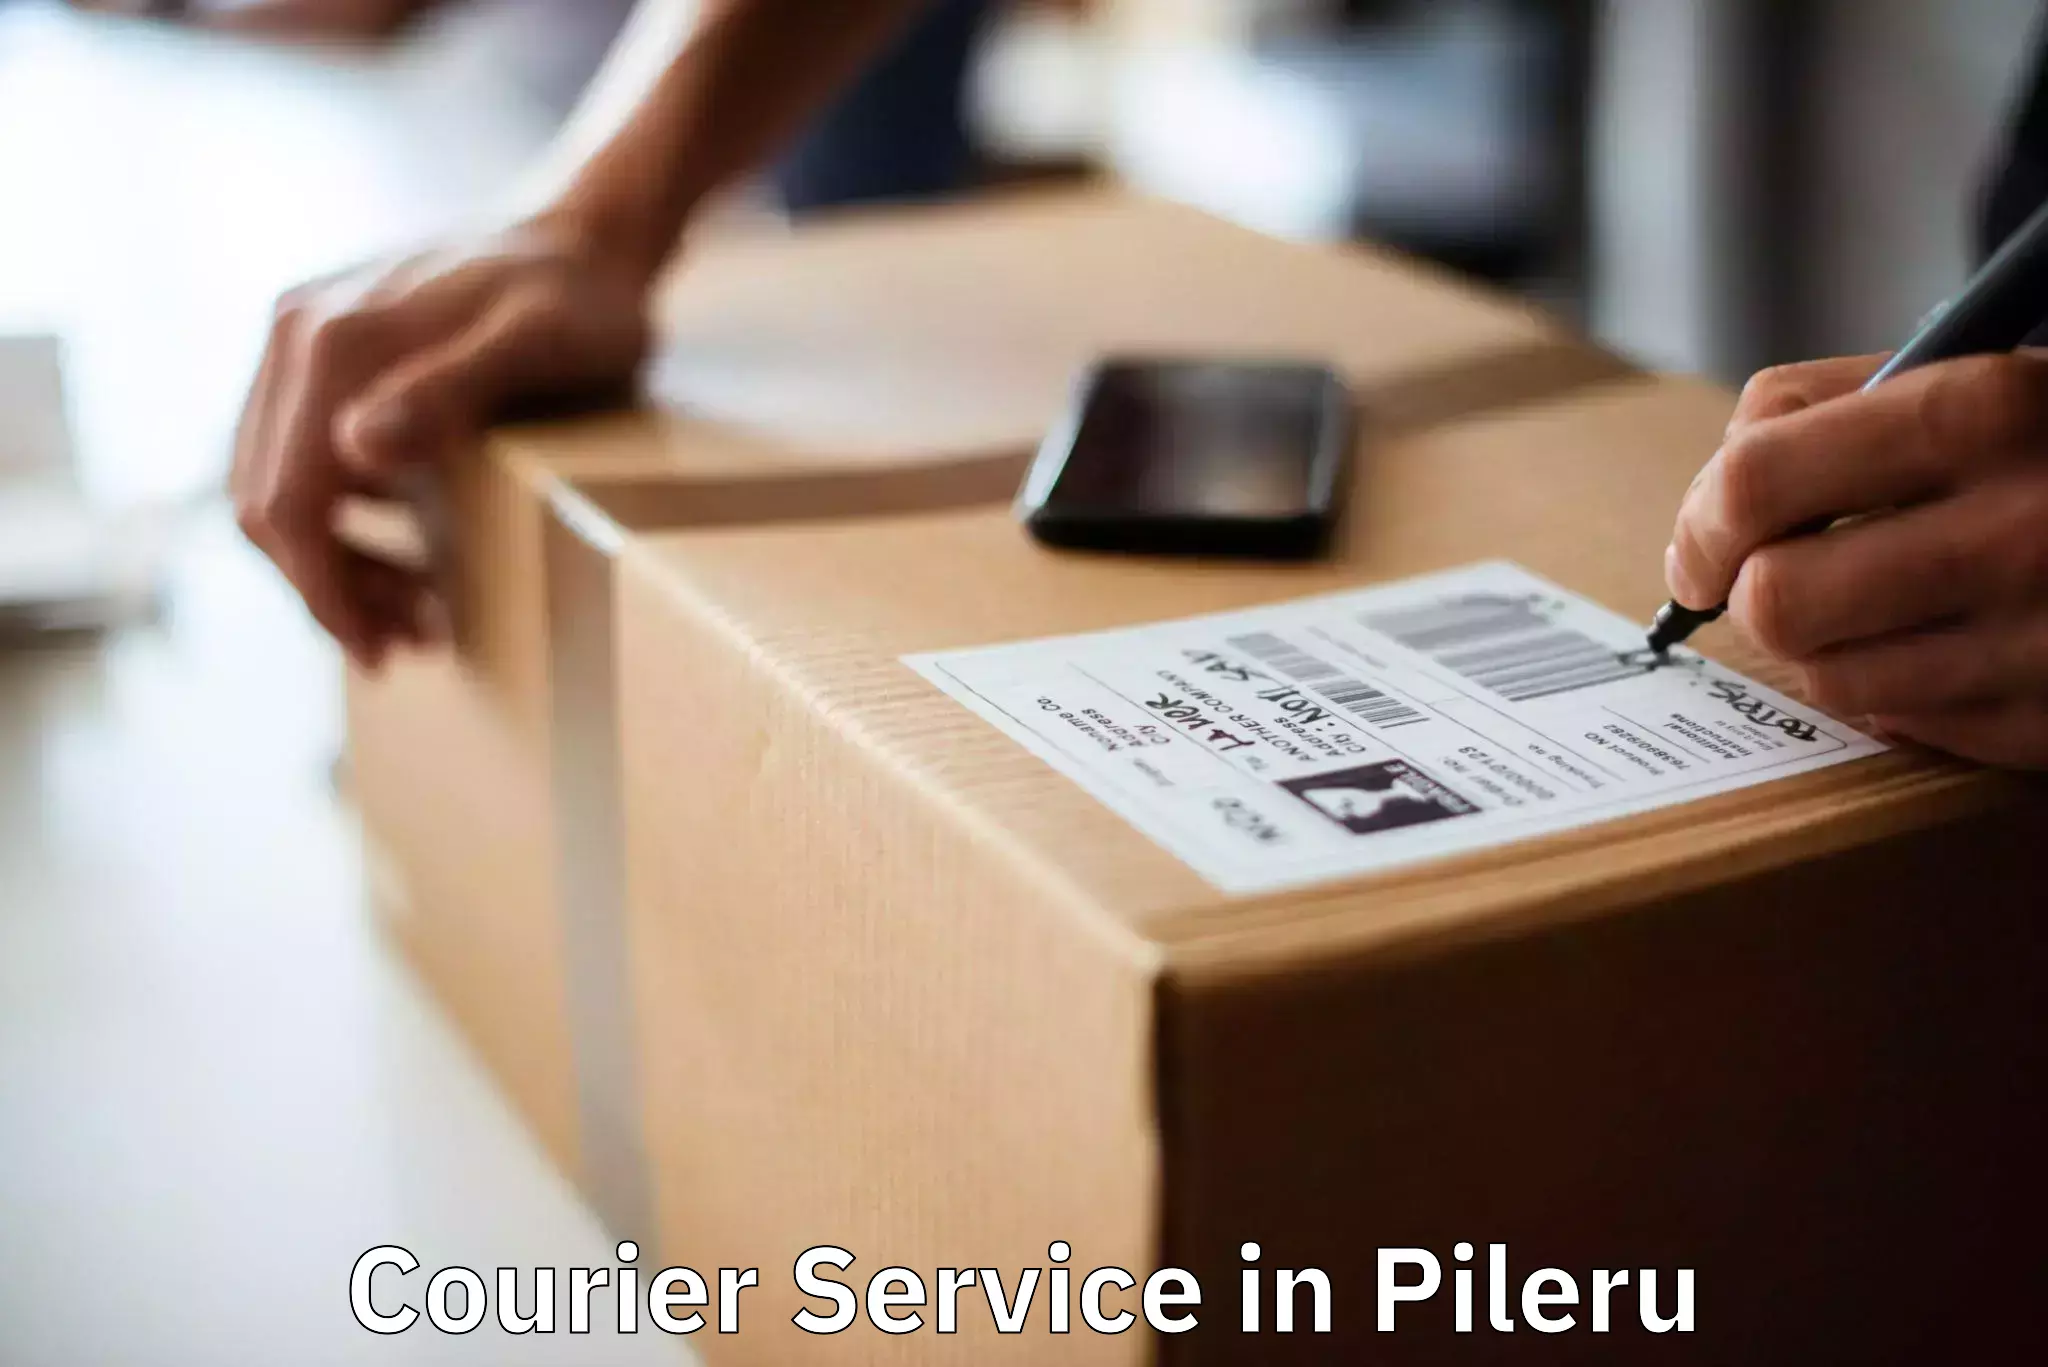 Quality courier services in Pileru